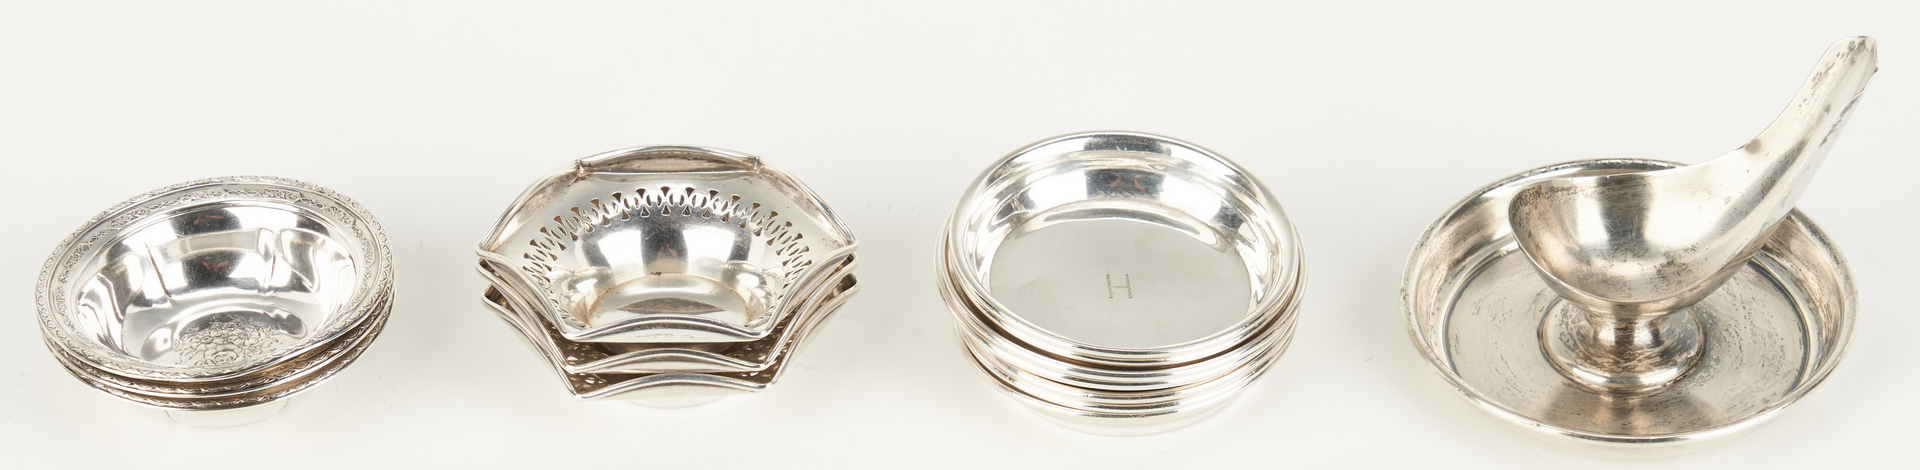 Lot 1047: 24 Assorted Sterling Sherbets, Butter Pats and More